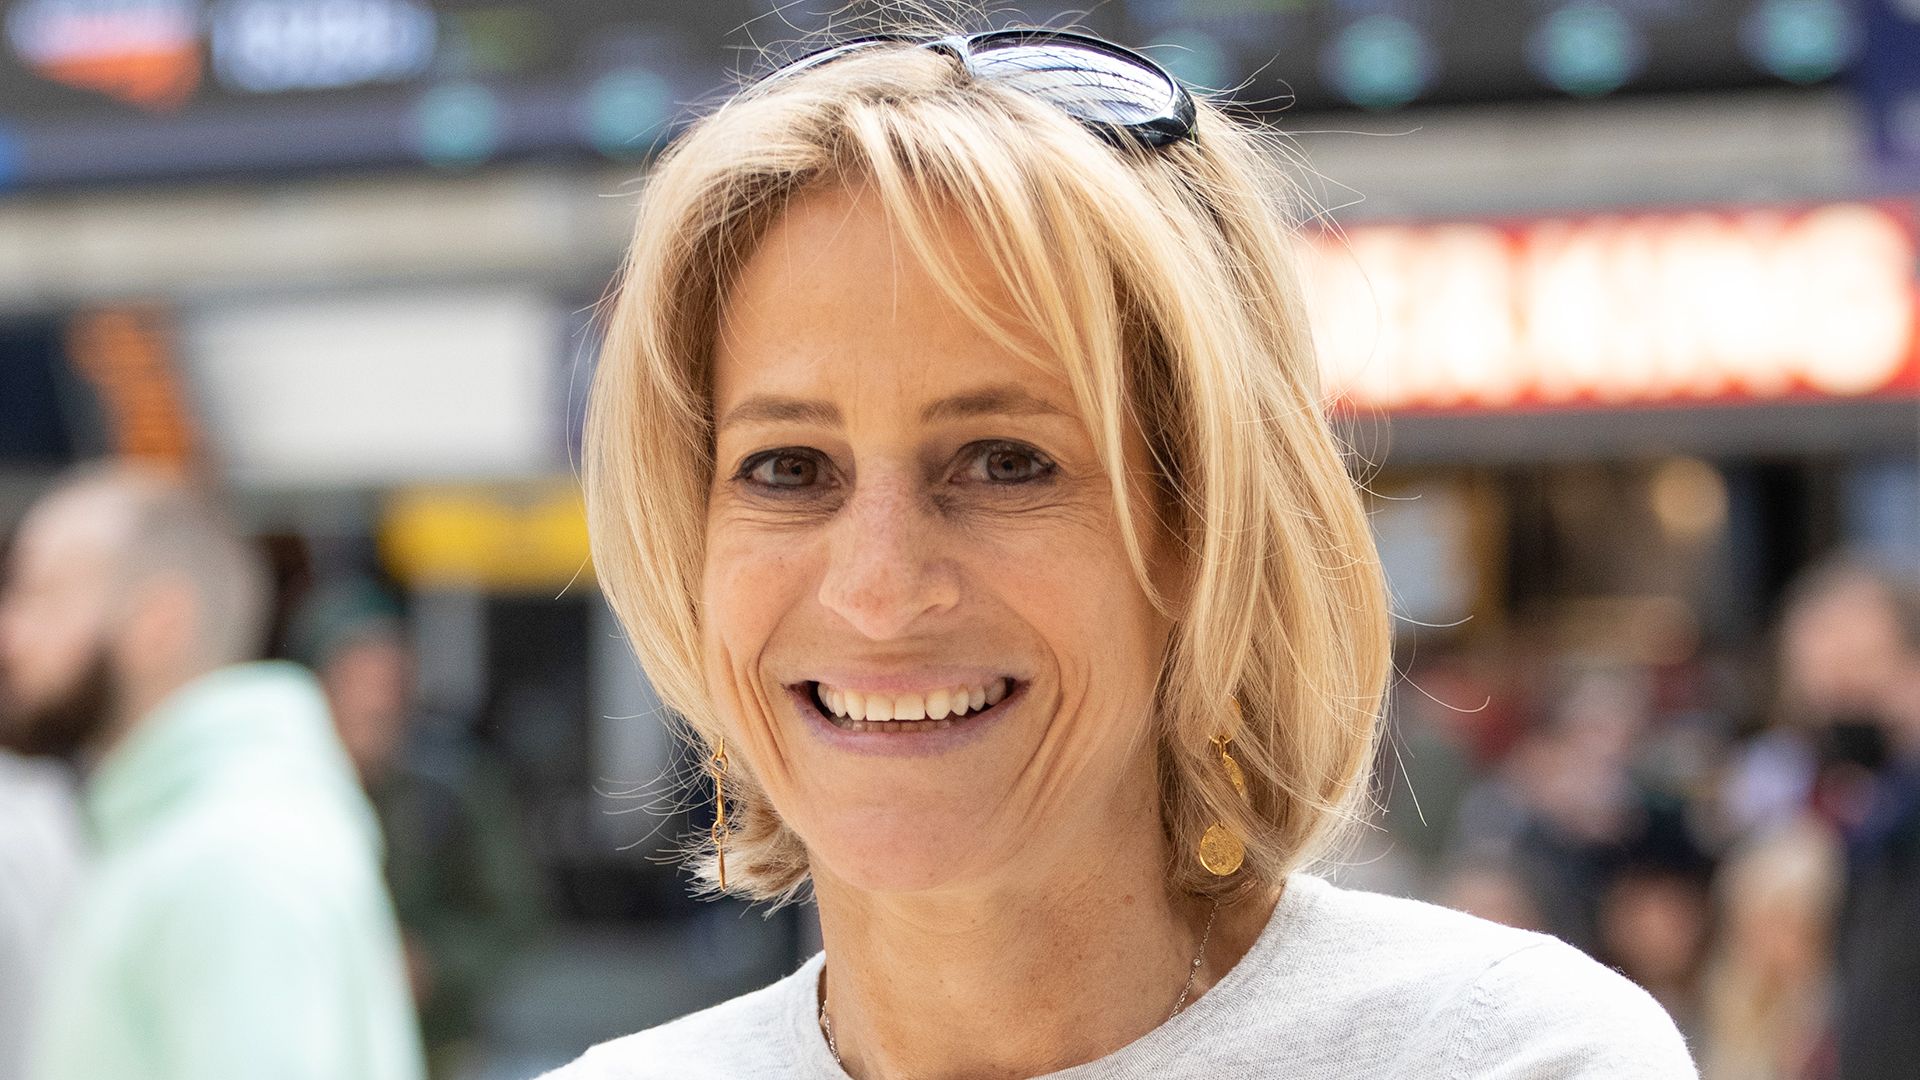 Emily Maitlis pictured at Victoria Station